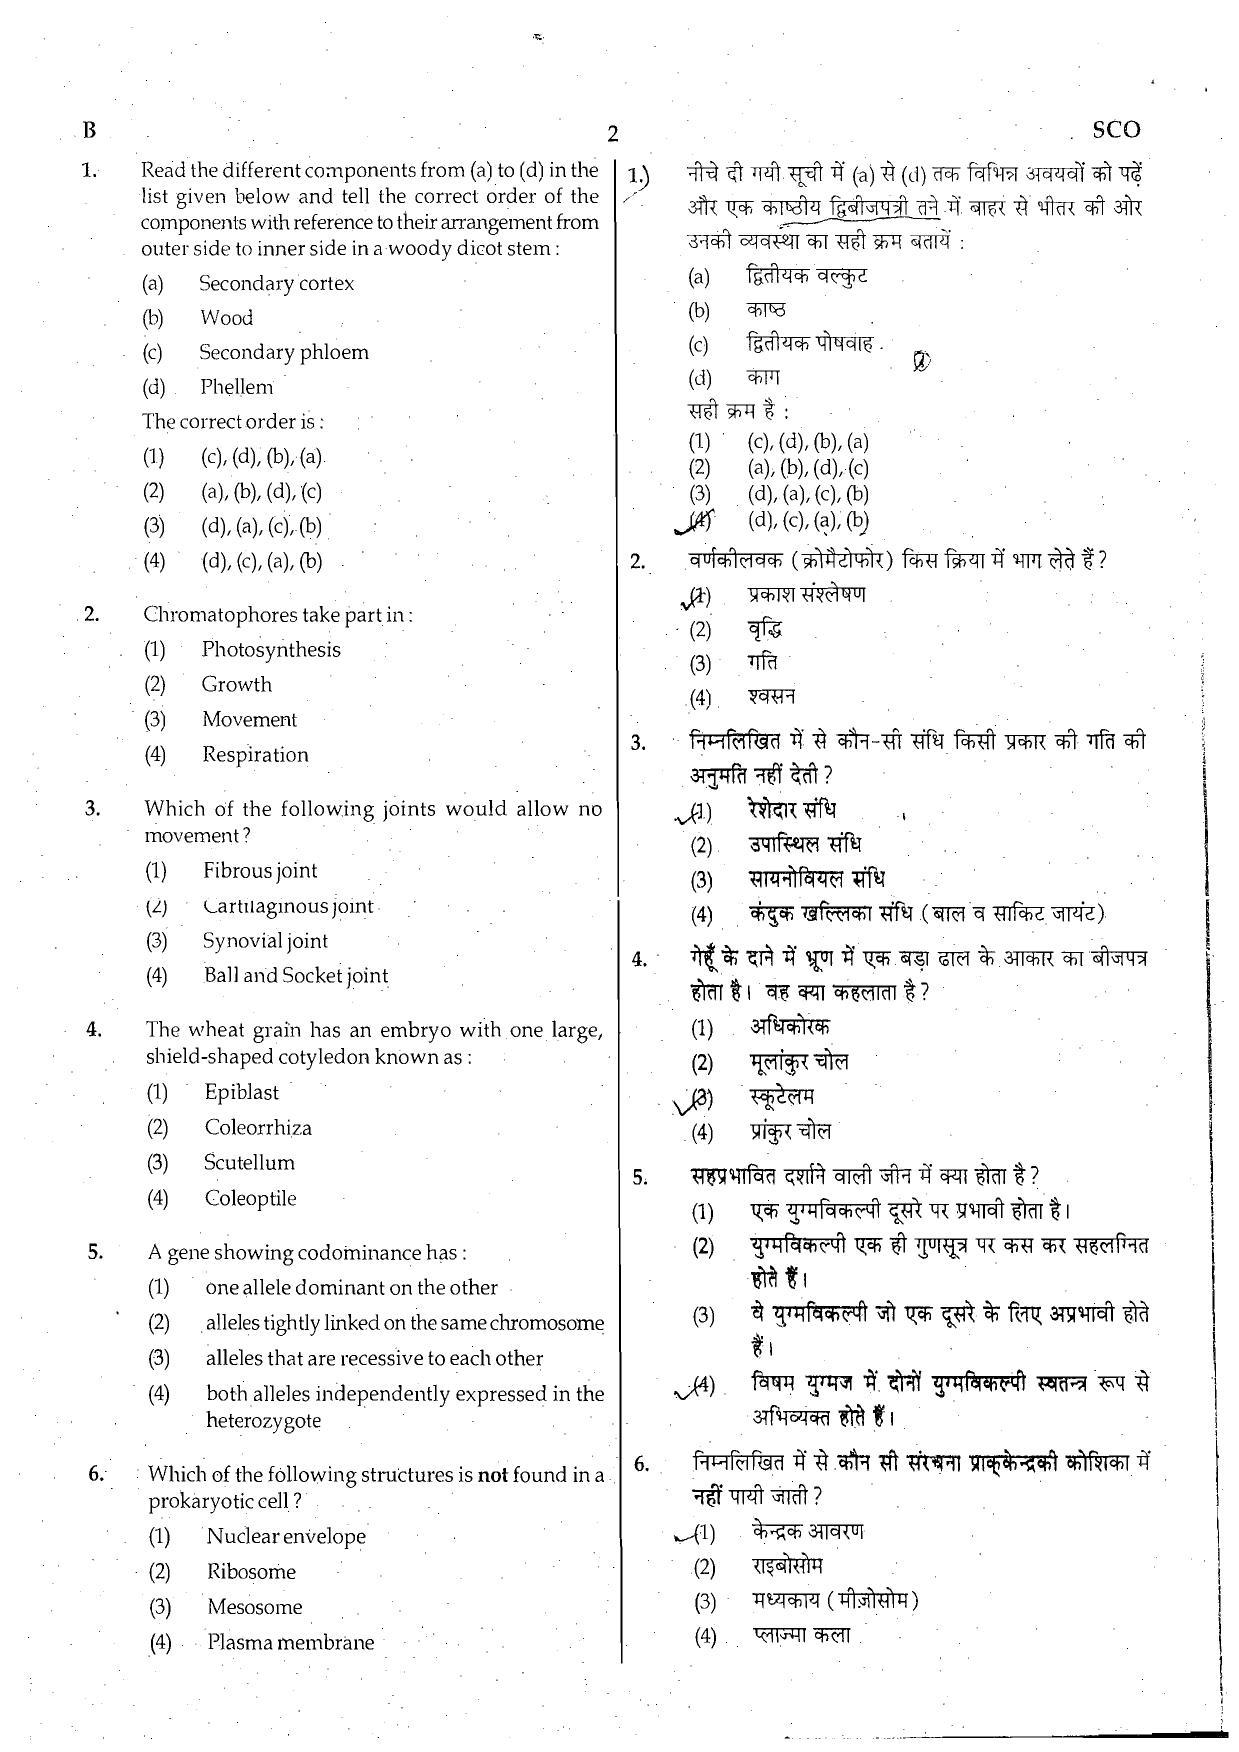 NEET Code B 2015 Question Paper - Page 2